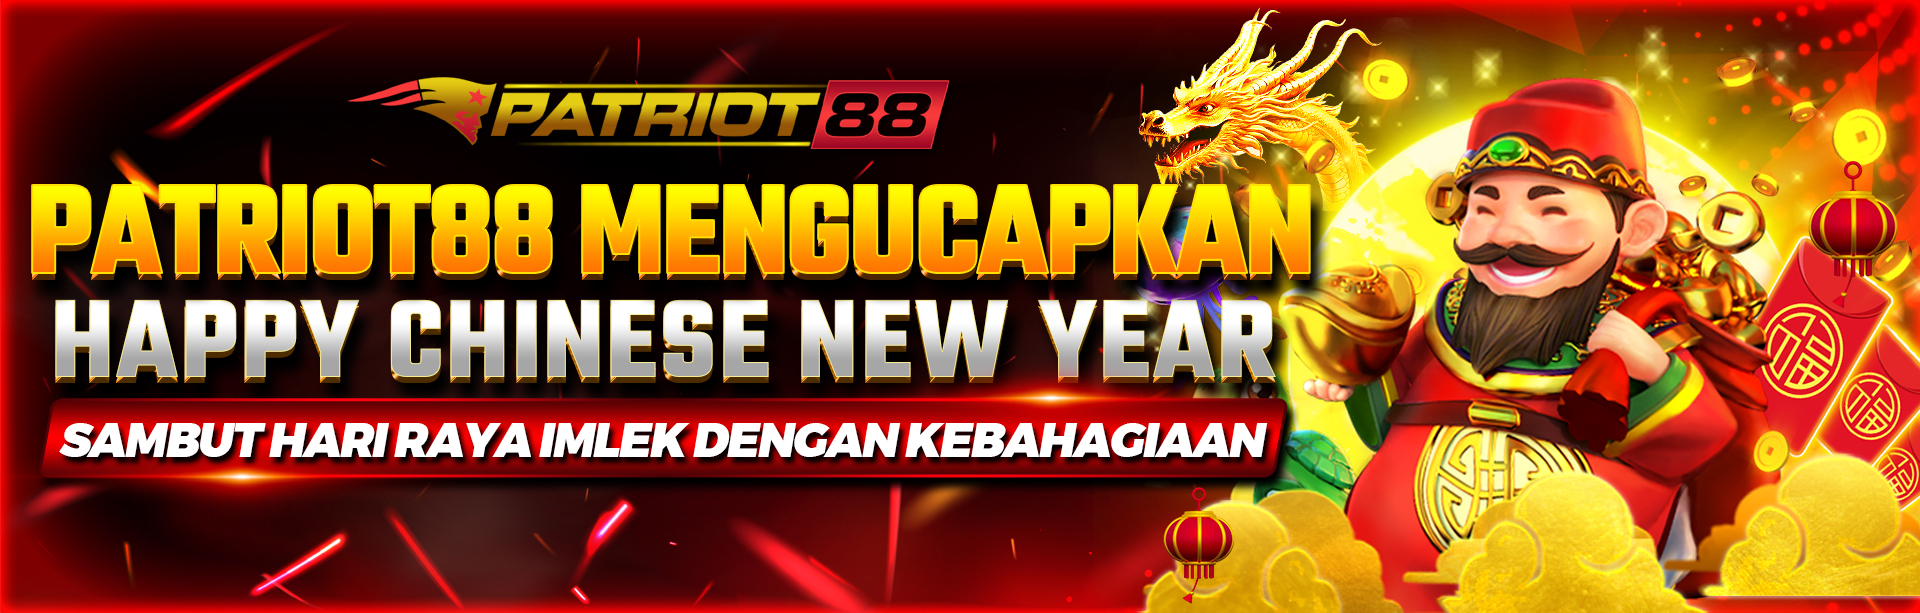 PATRIOT88 MENGUCAPKAN HAPPY CHINESE NEW YEAR